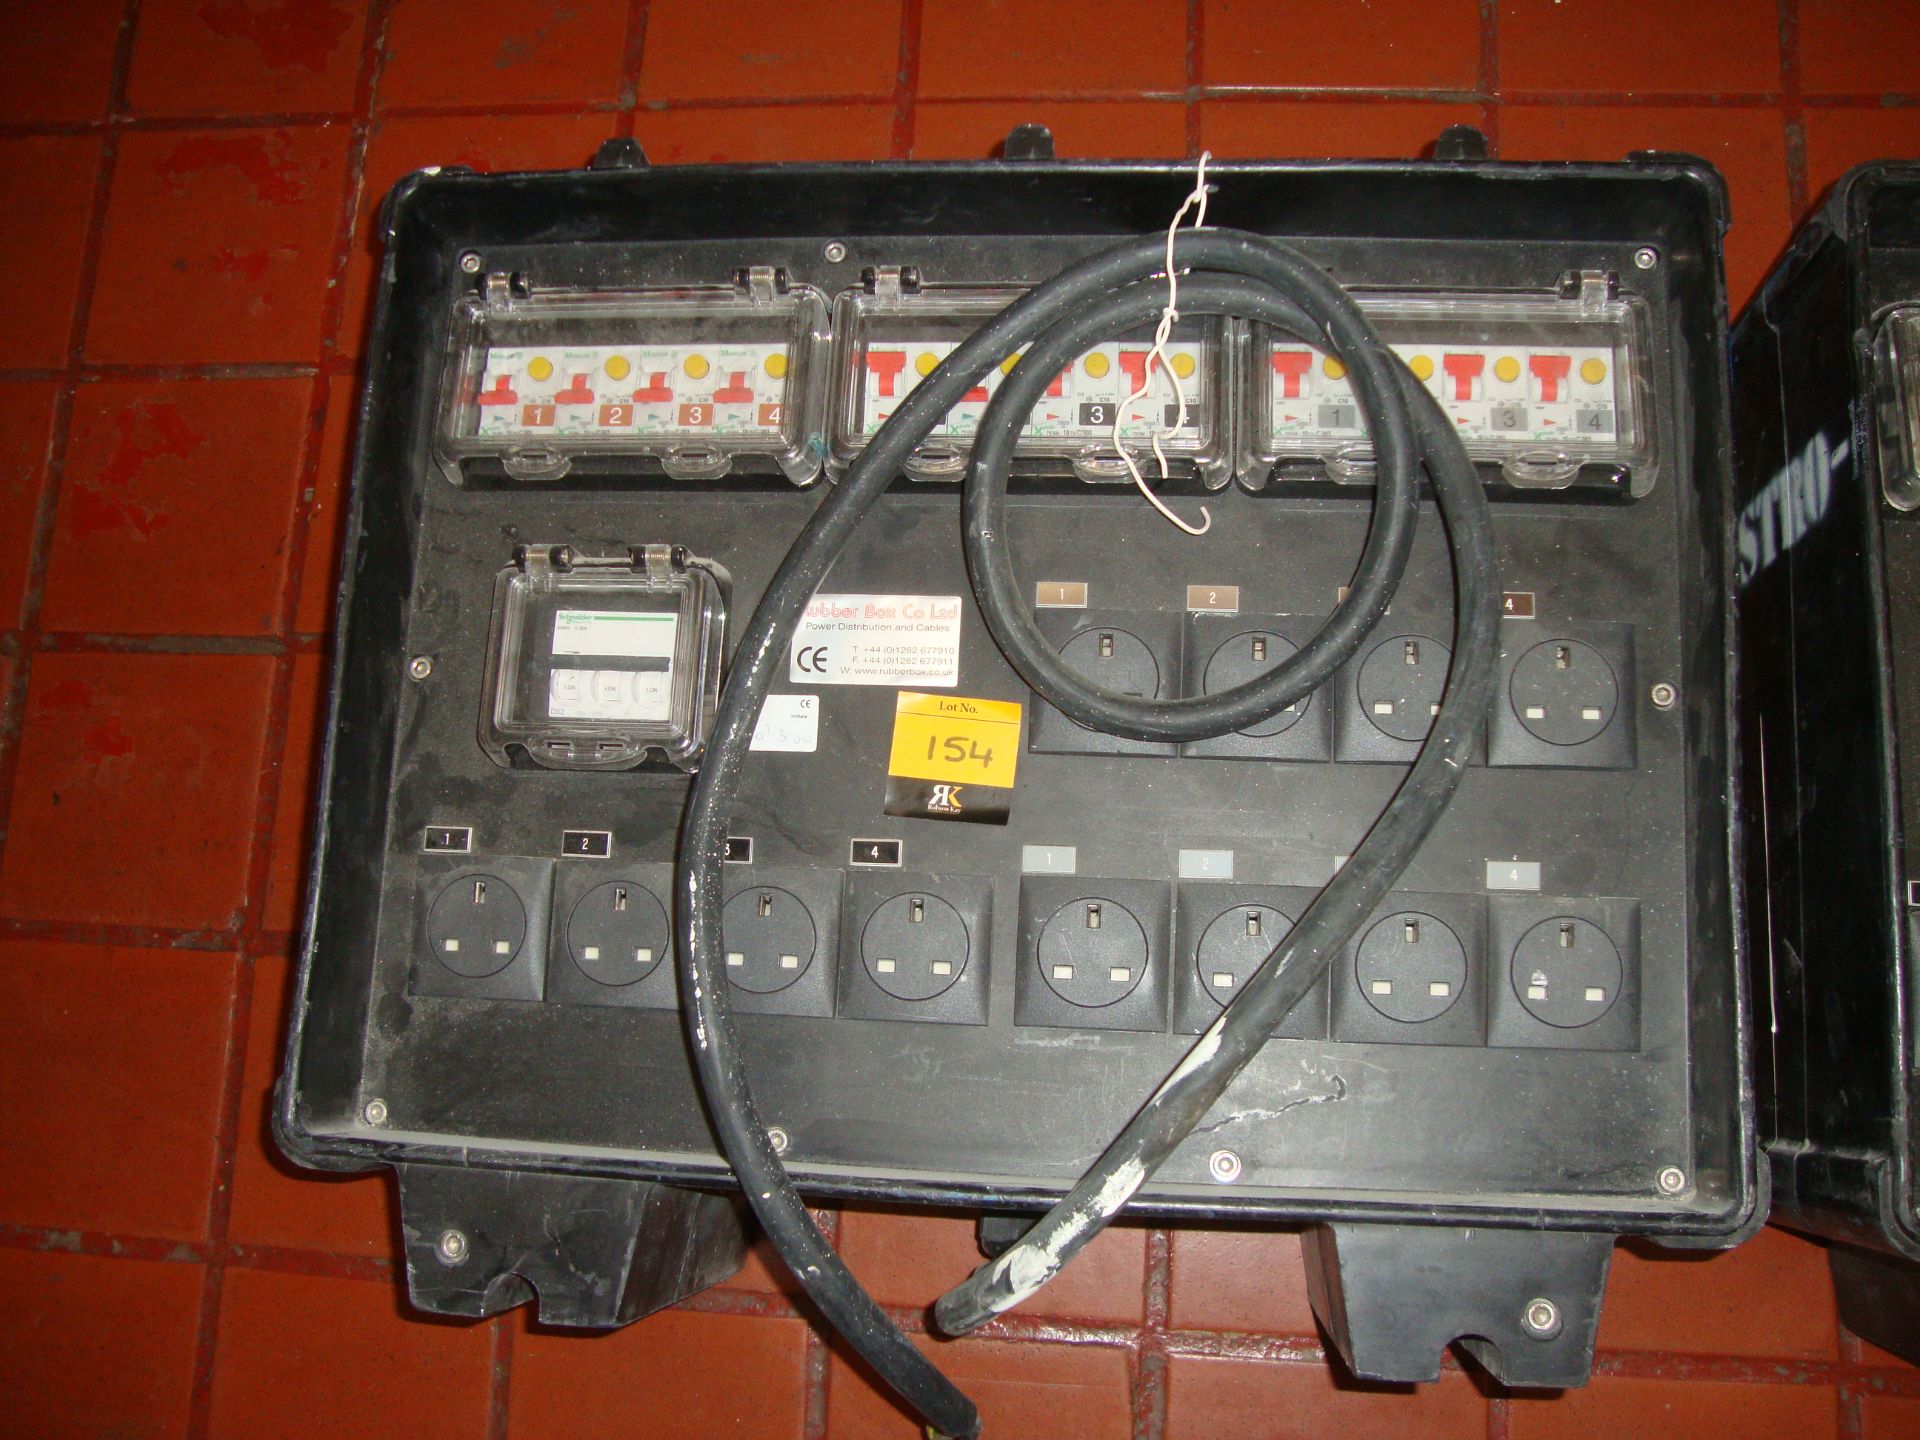 Power distribution system incorporating 3 banks each with 4 3 pin sockets, all of which have their - Image 2 of 3